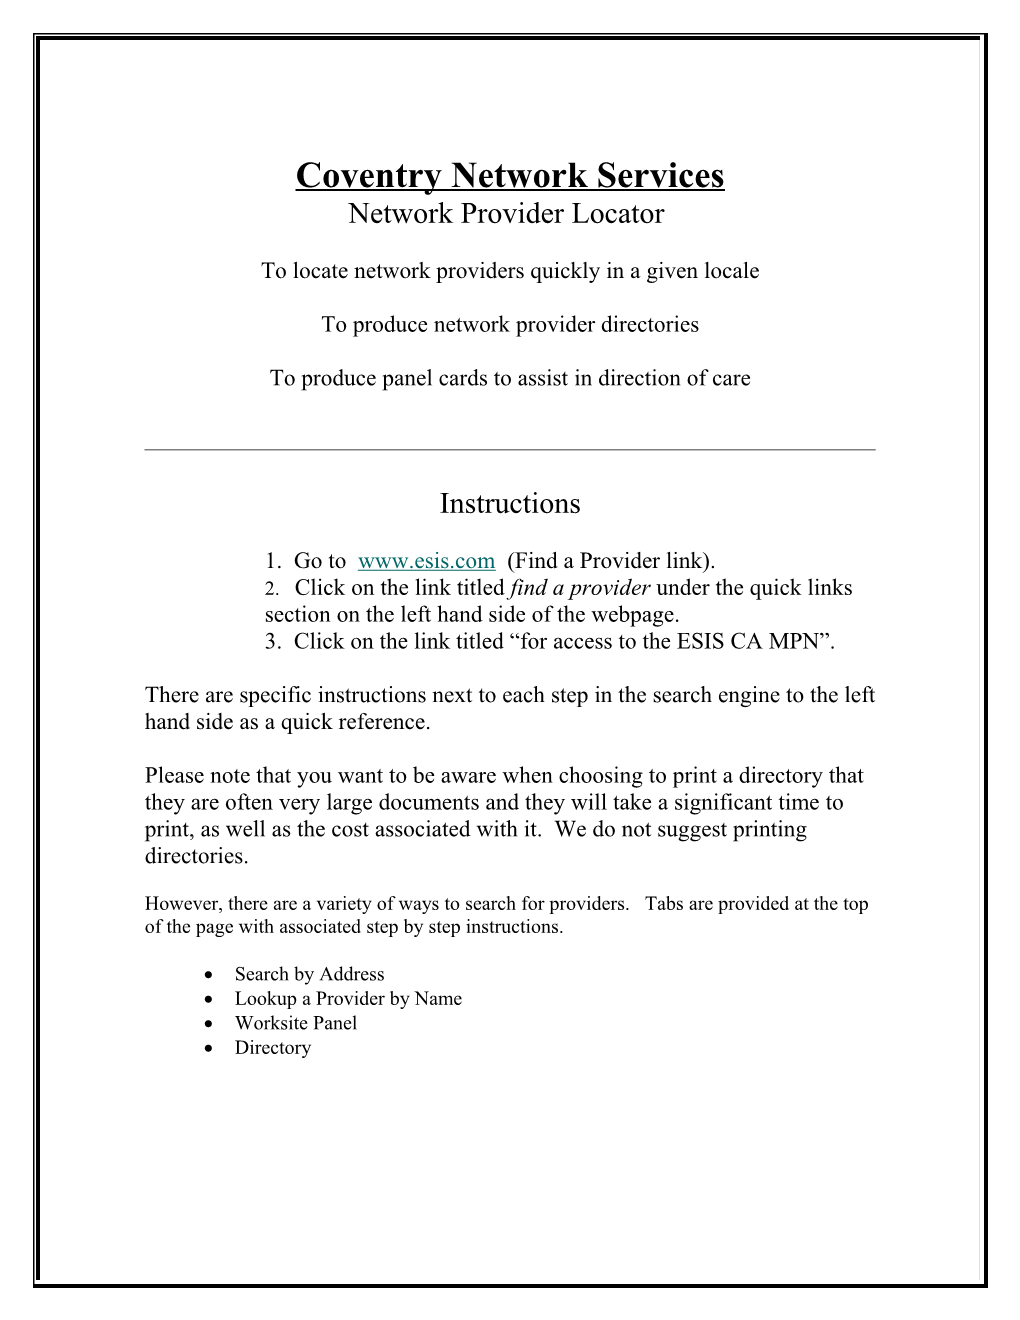 Coventry Network Services